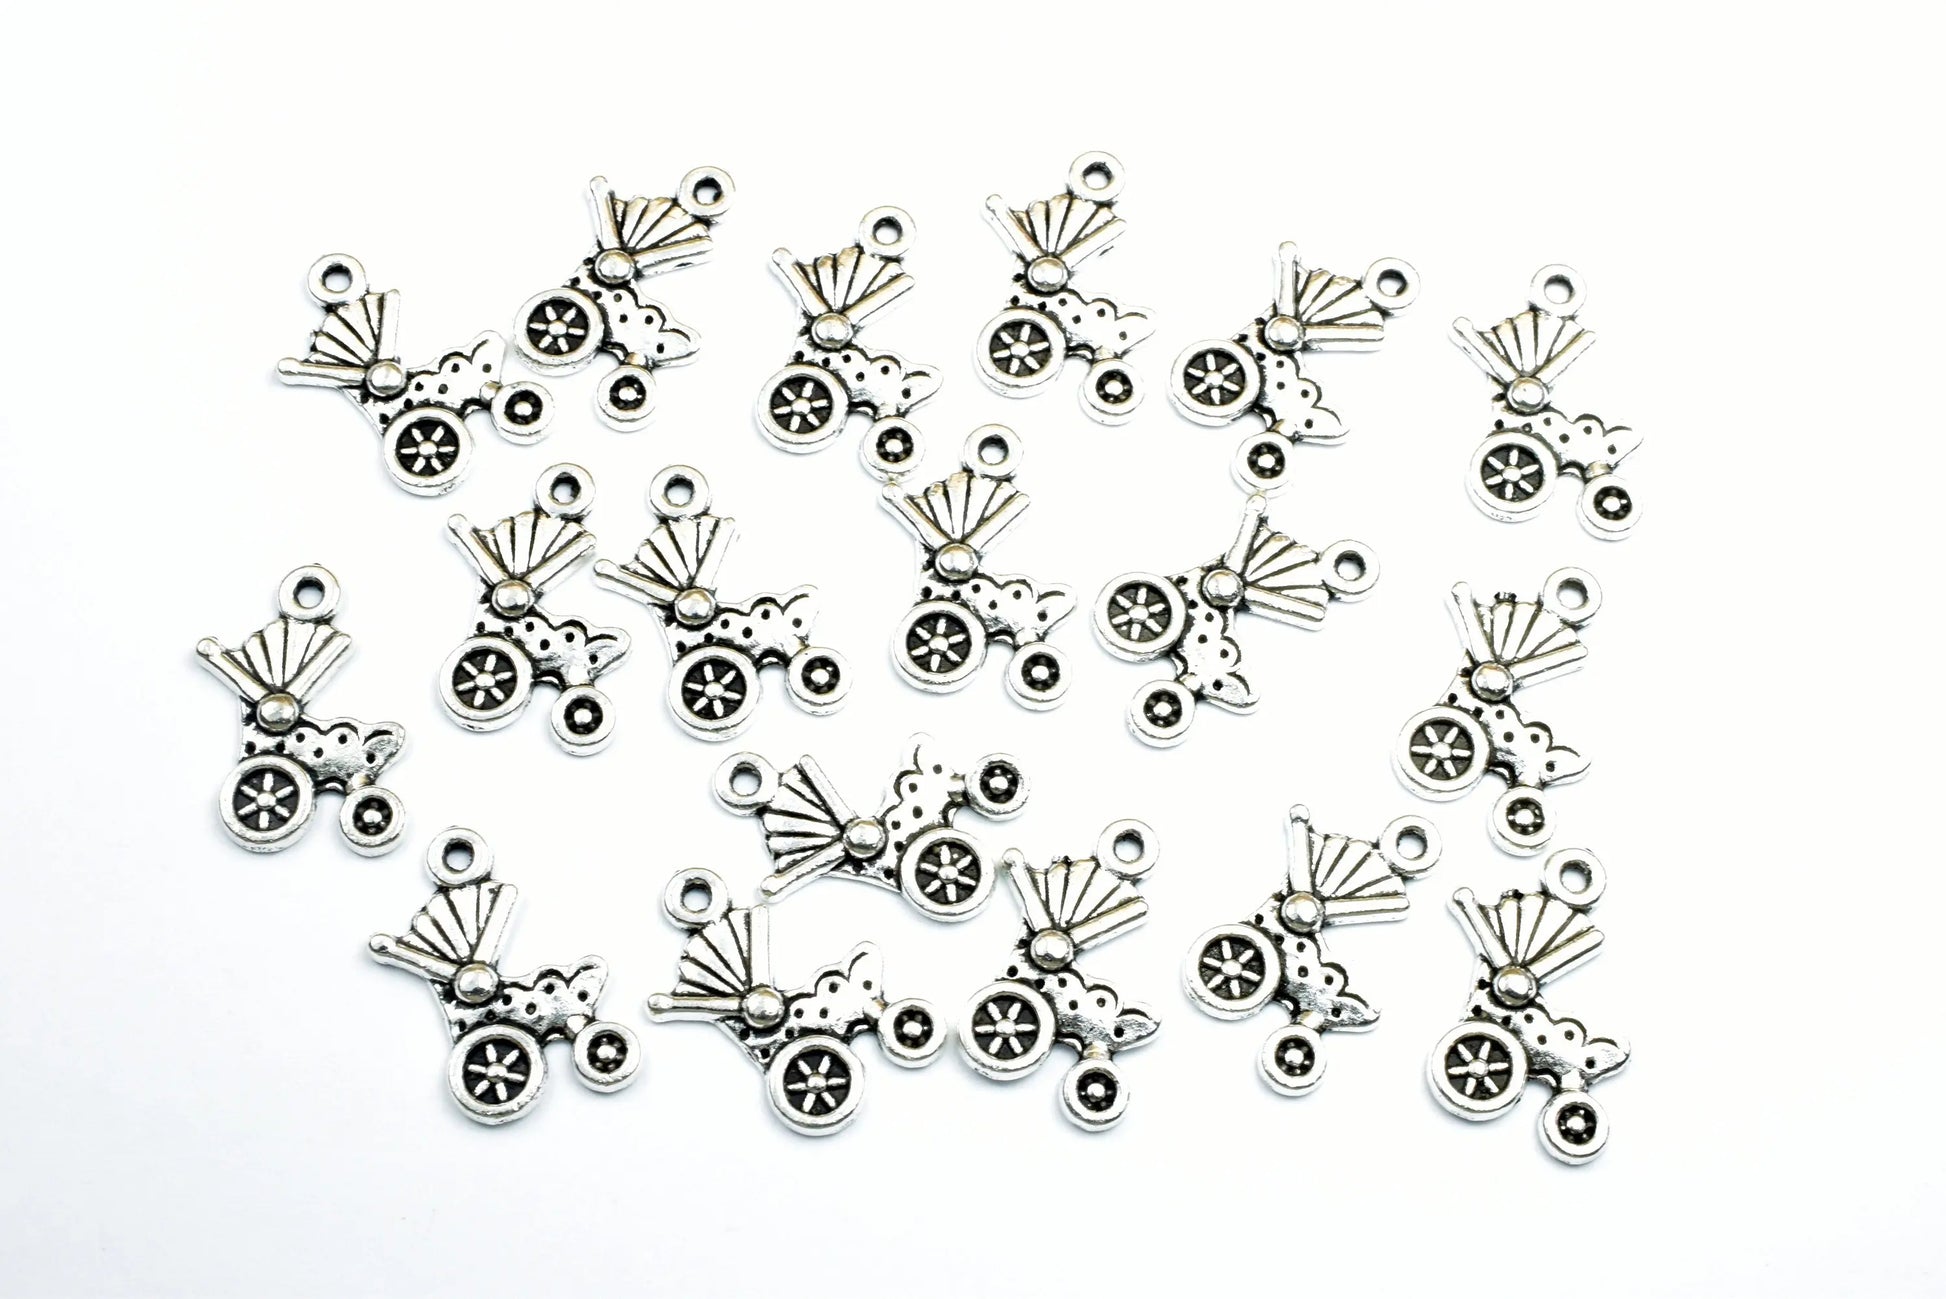 Baby Stroller Charms Size 19x12mm Silver Color Charm Pendant Finding For Jewelry Making 16PCs Per Pack - BeadsFindingDepot